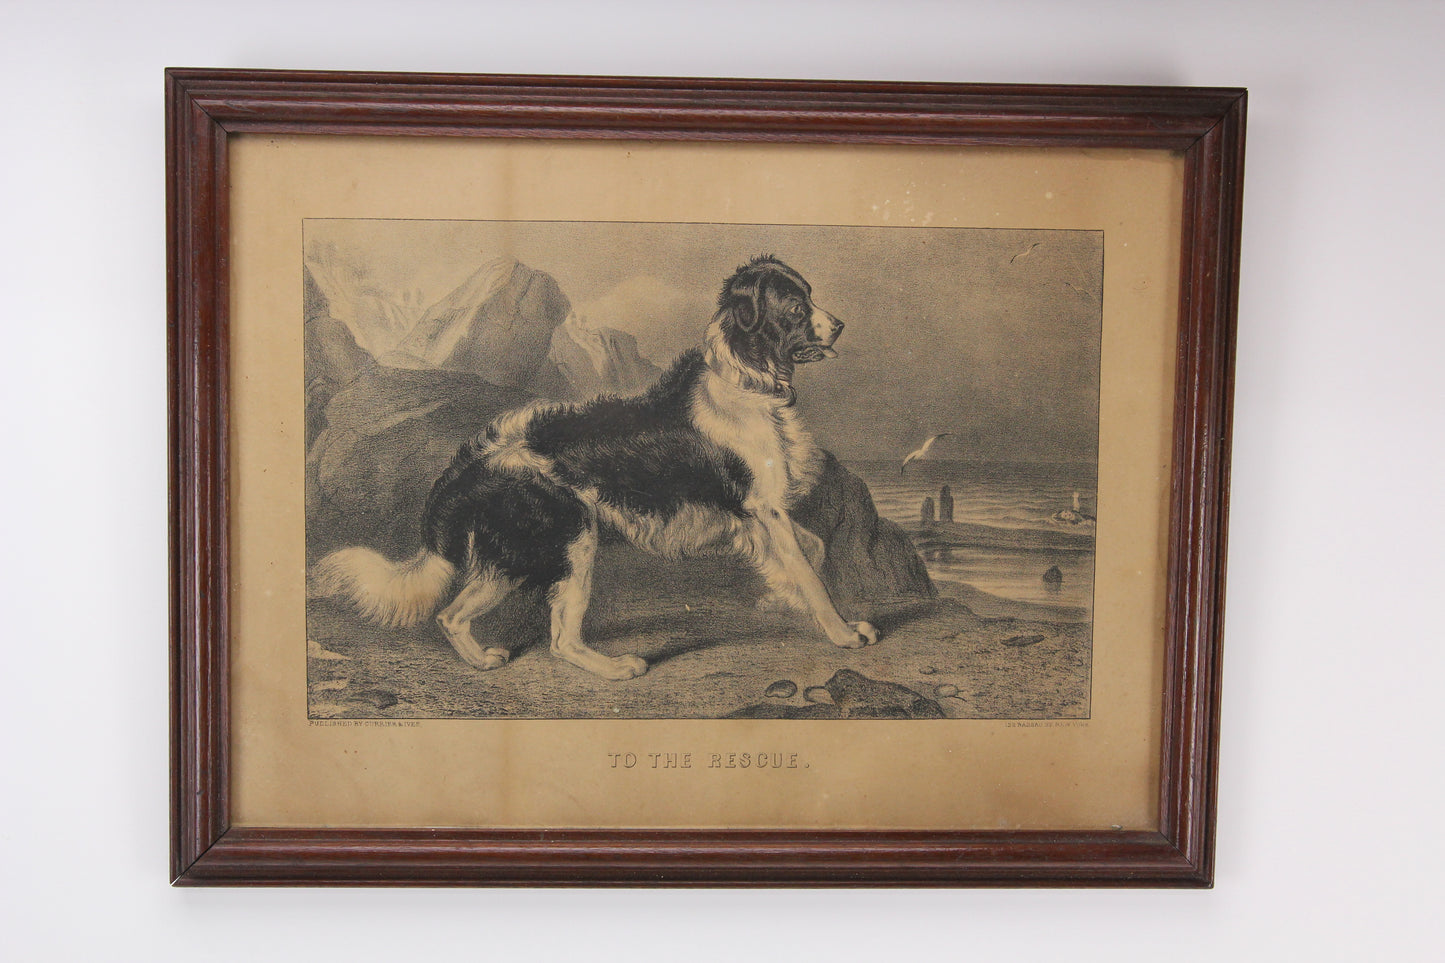 Antique "To the Rescue" Framed Currier and Ives Dog Lithograph (1 of 2 in Series)